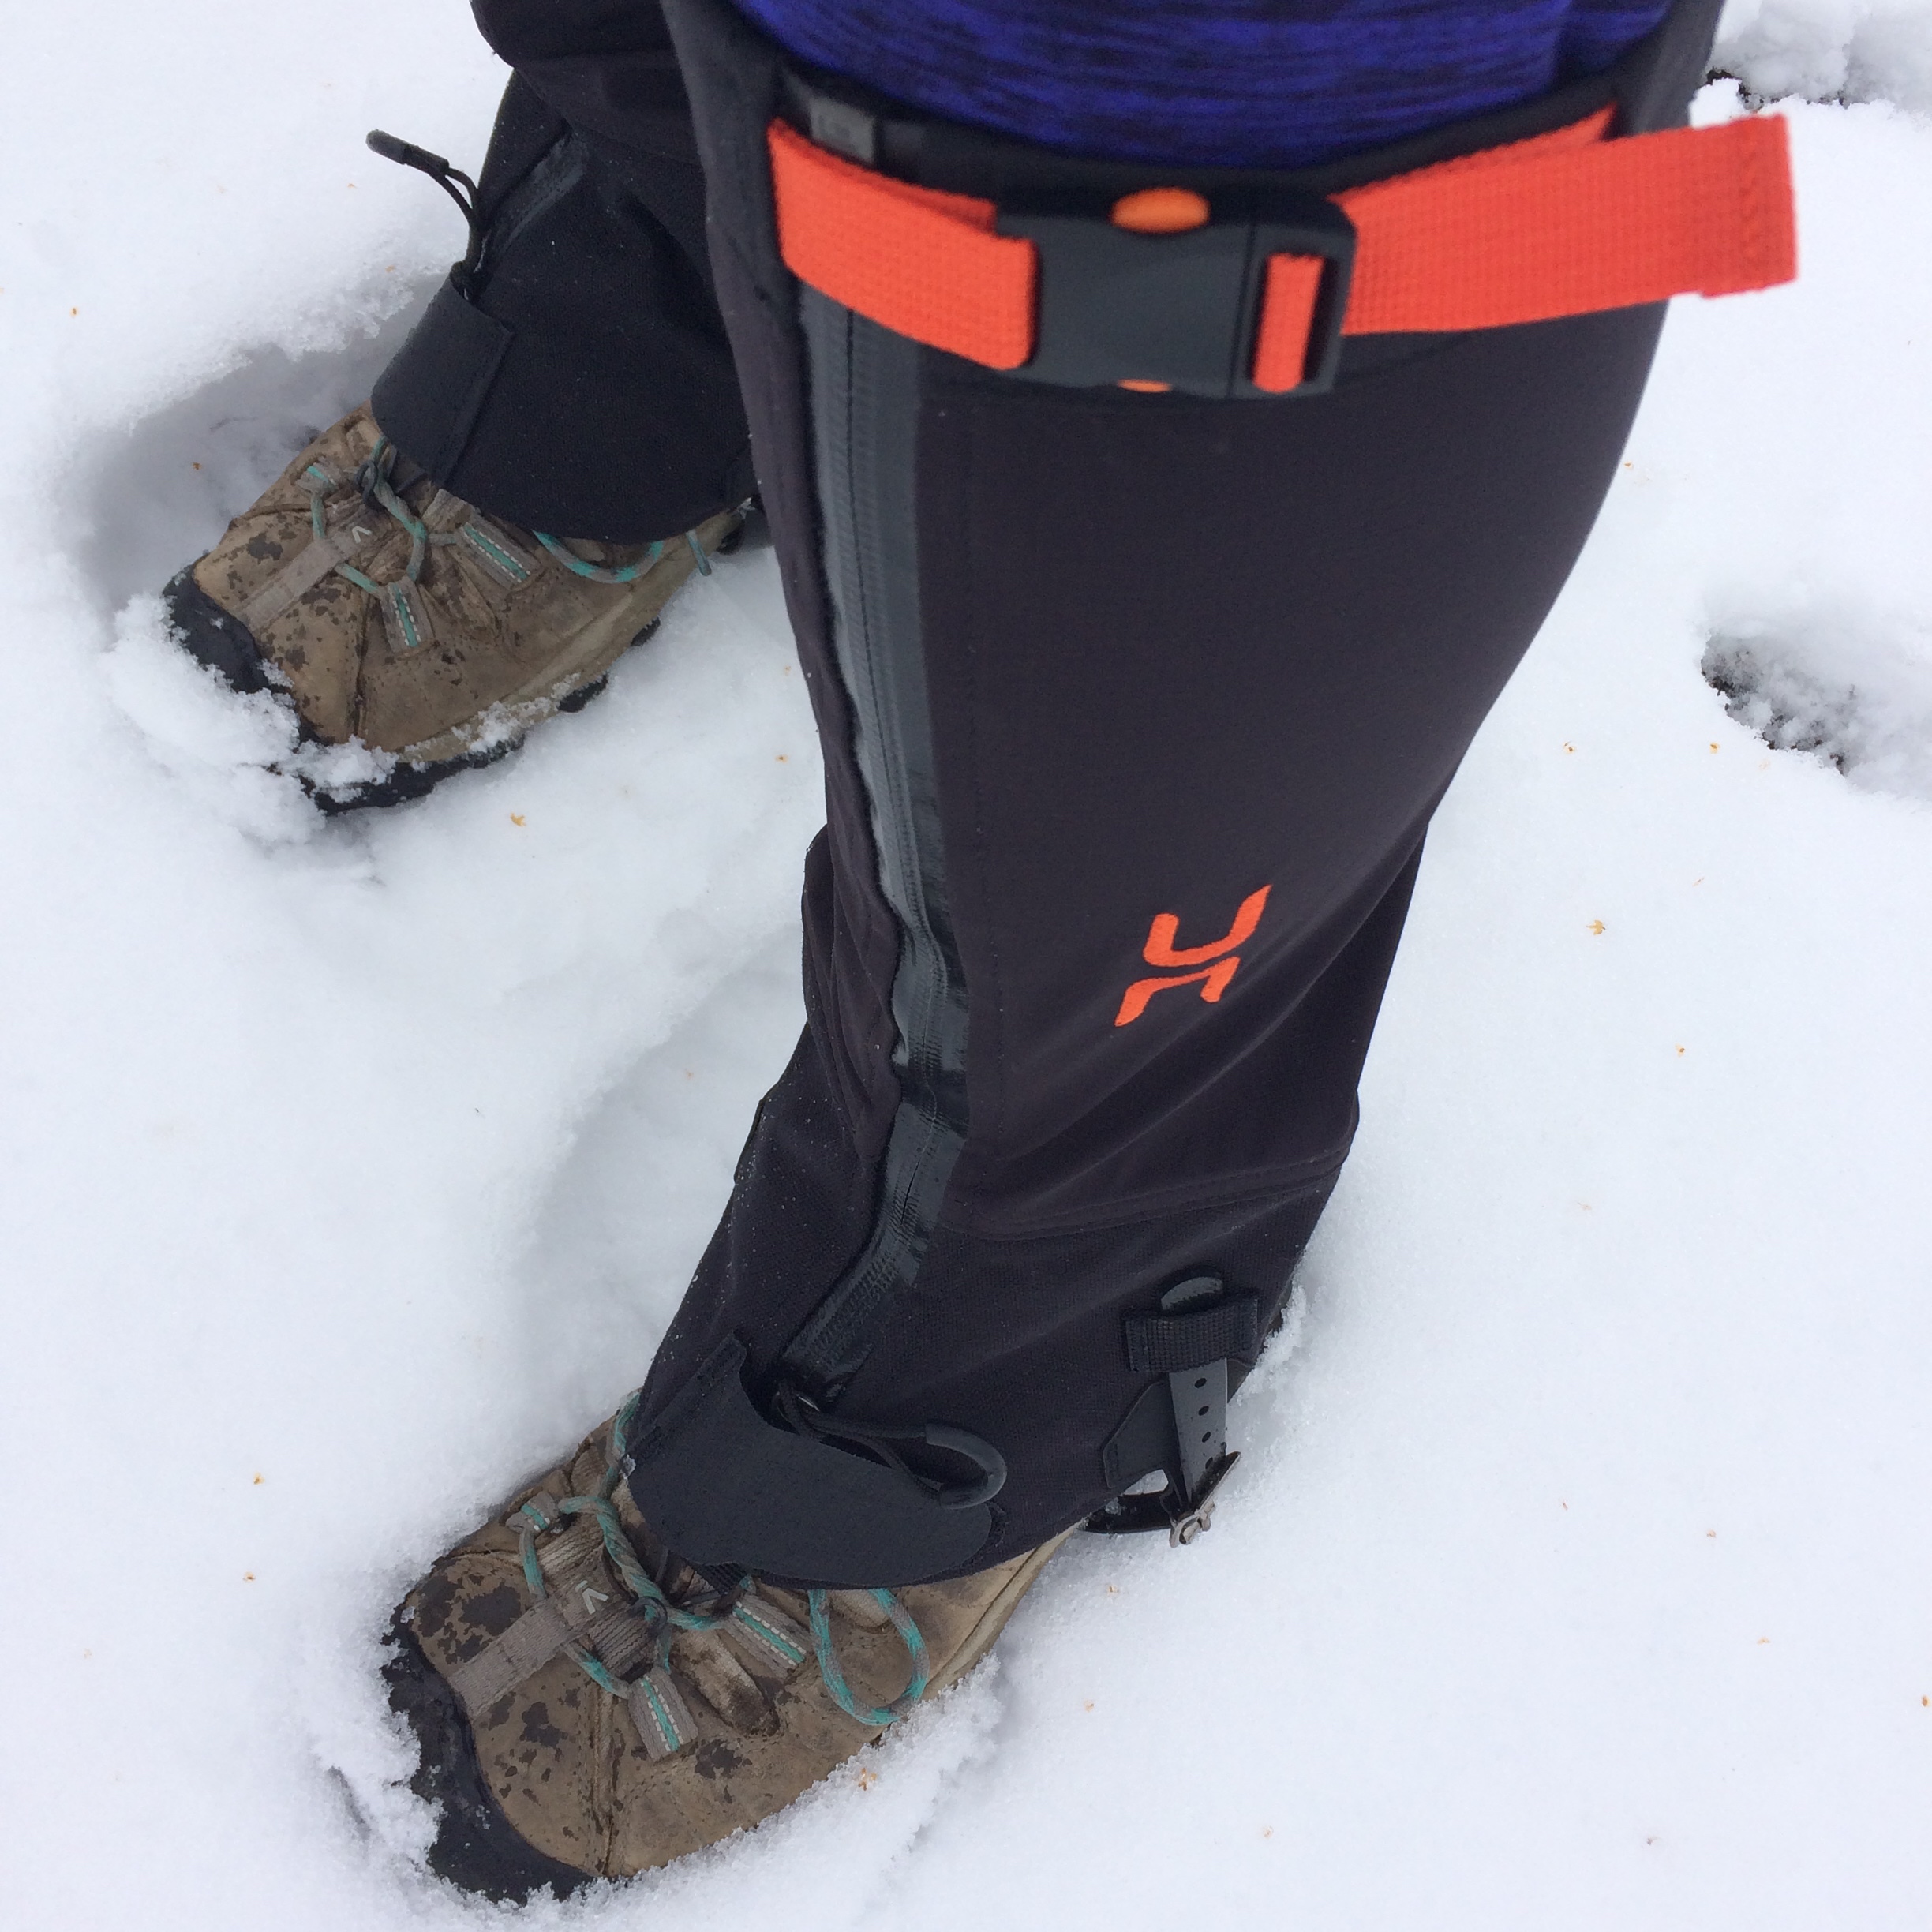 Gear Review – Armadillo LT Gaiters from Hillsound